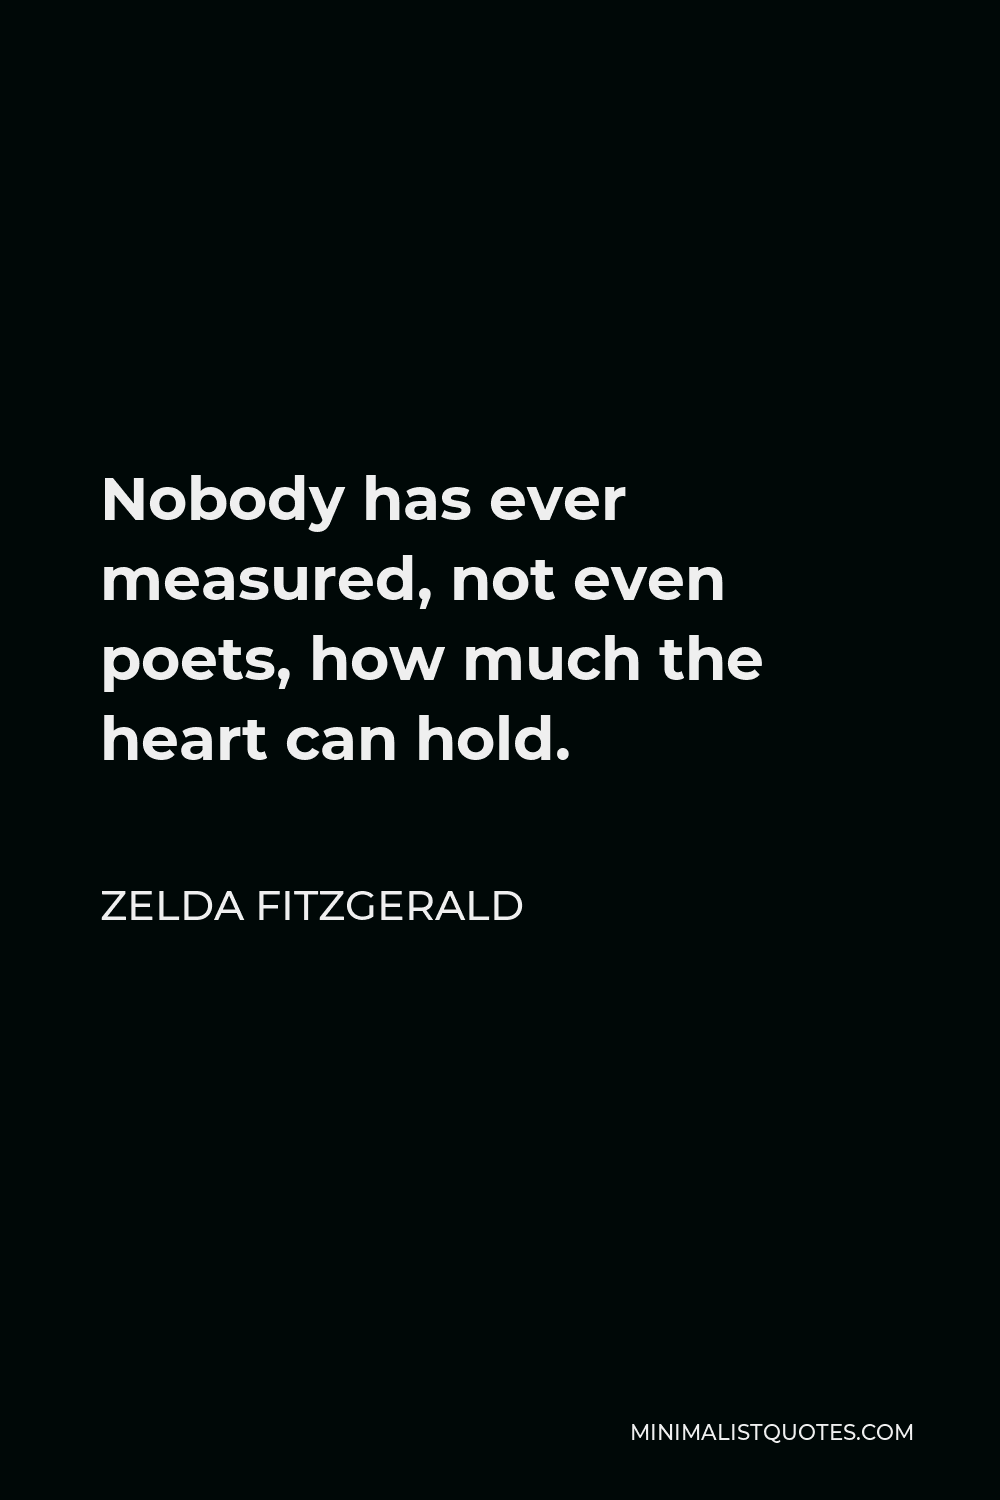 Zelda Fitzgerald Quote - Nobody has ever measured, not even poets, how much the heart can hold.